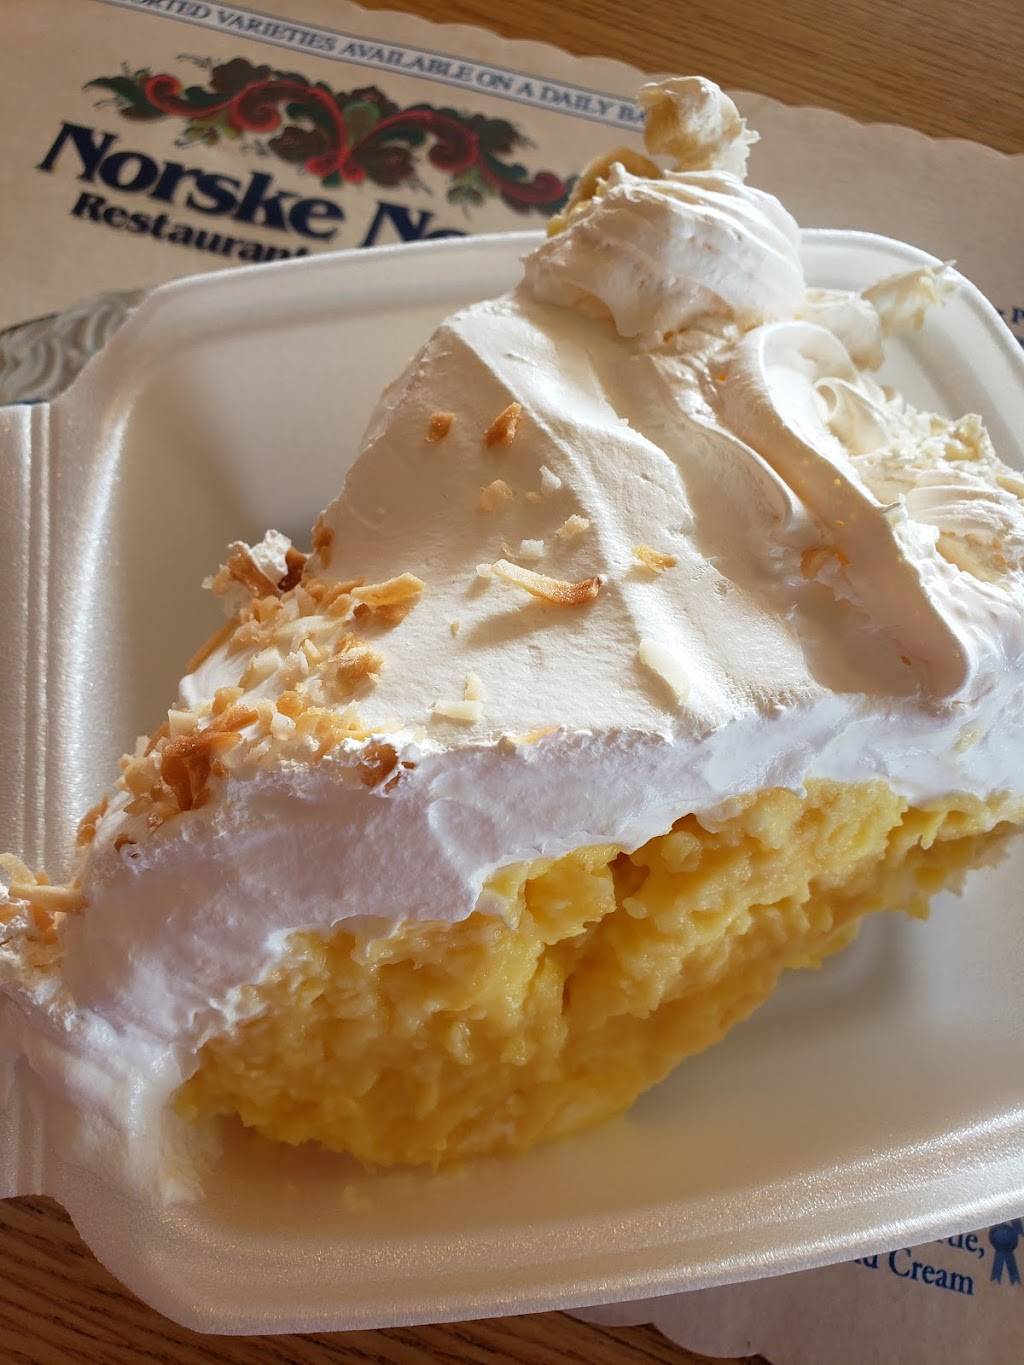 Norske Nook | restaurant | 2900 Pioneer Ave, Rice Lake, WI 54868, USA | 7152341733 OR +1 715-234-1733